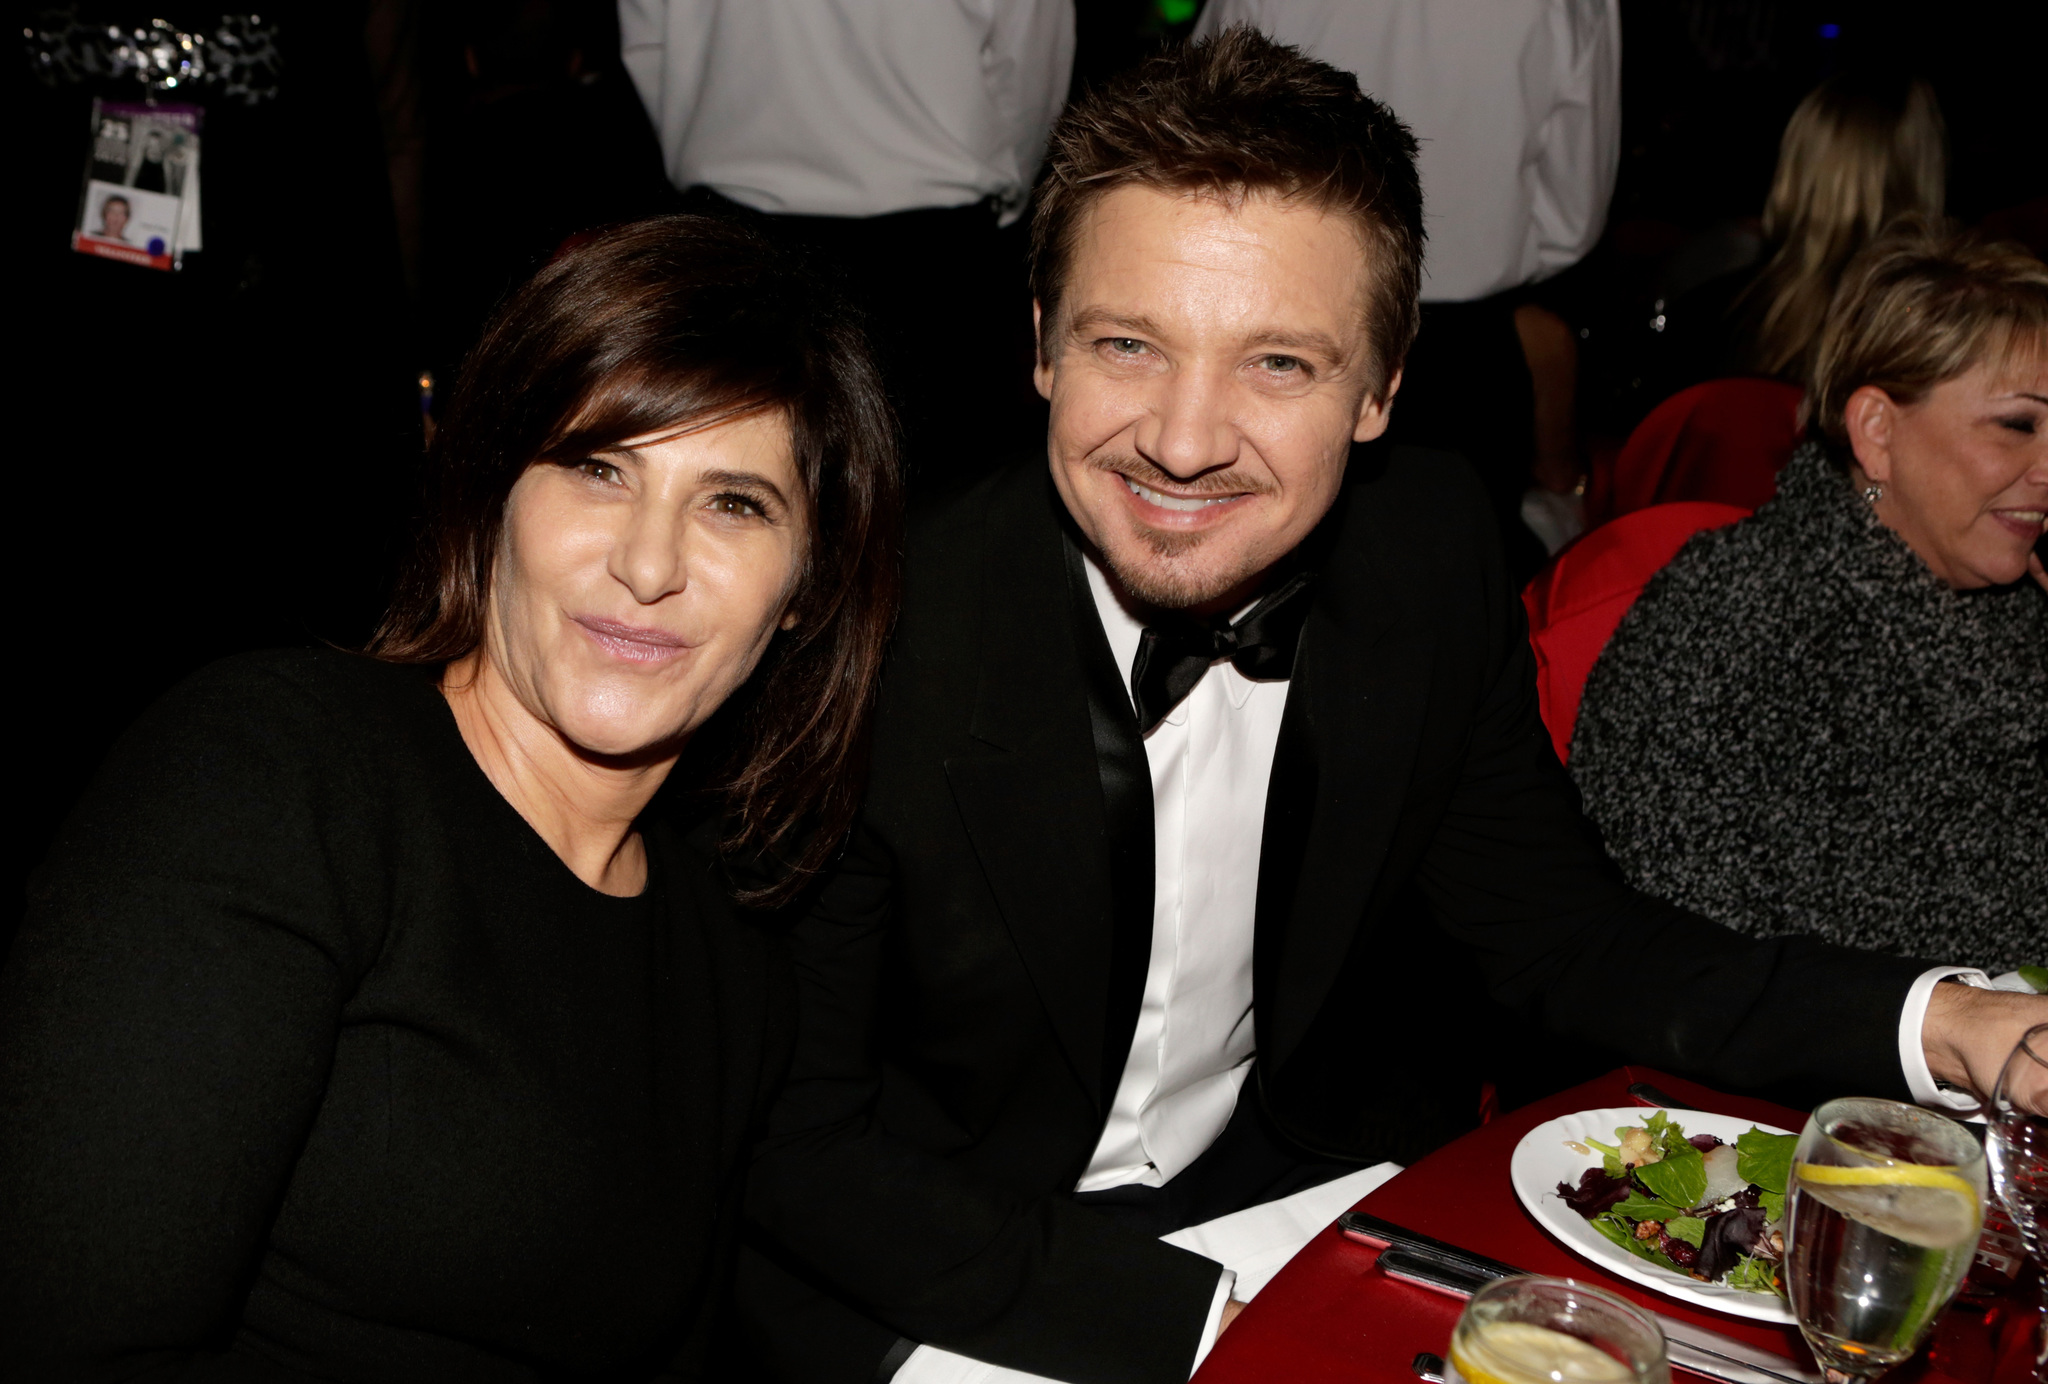 Jeremy Renner and Amy Pascal